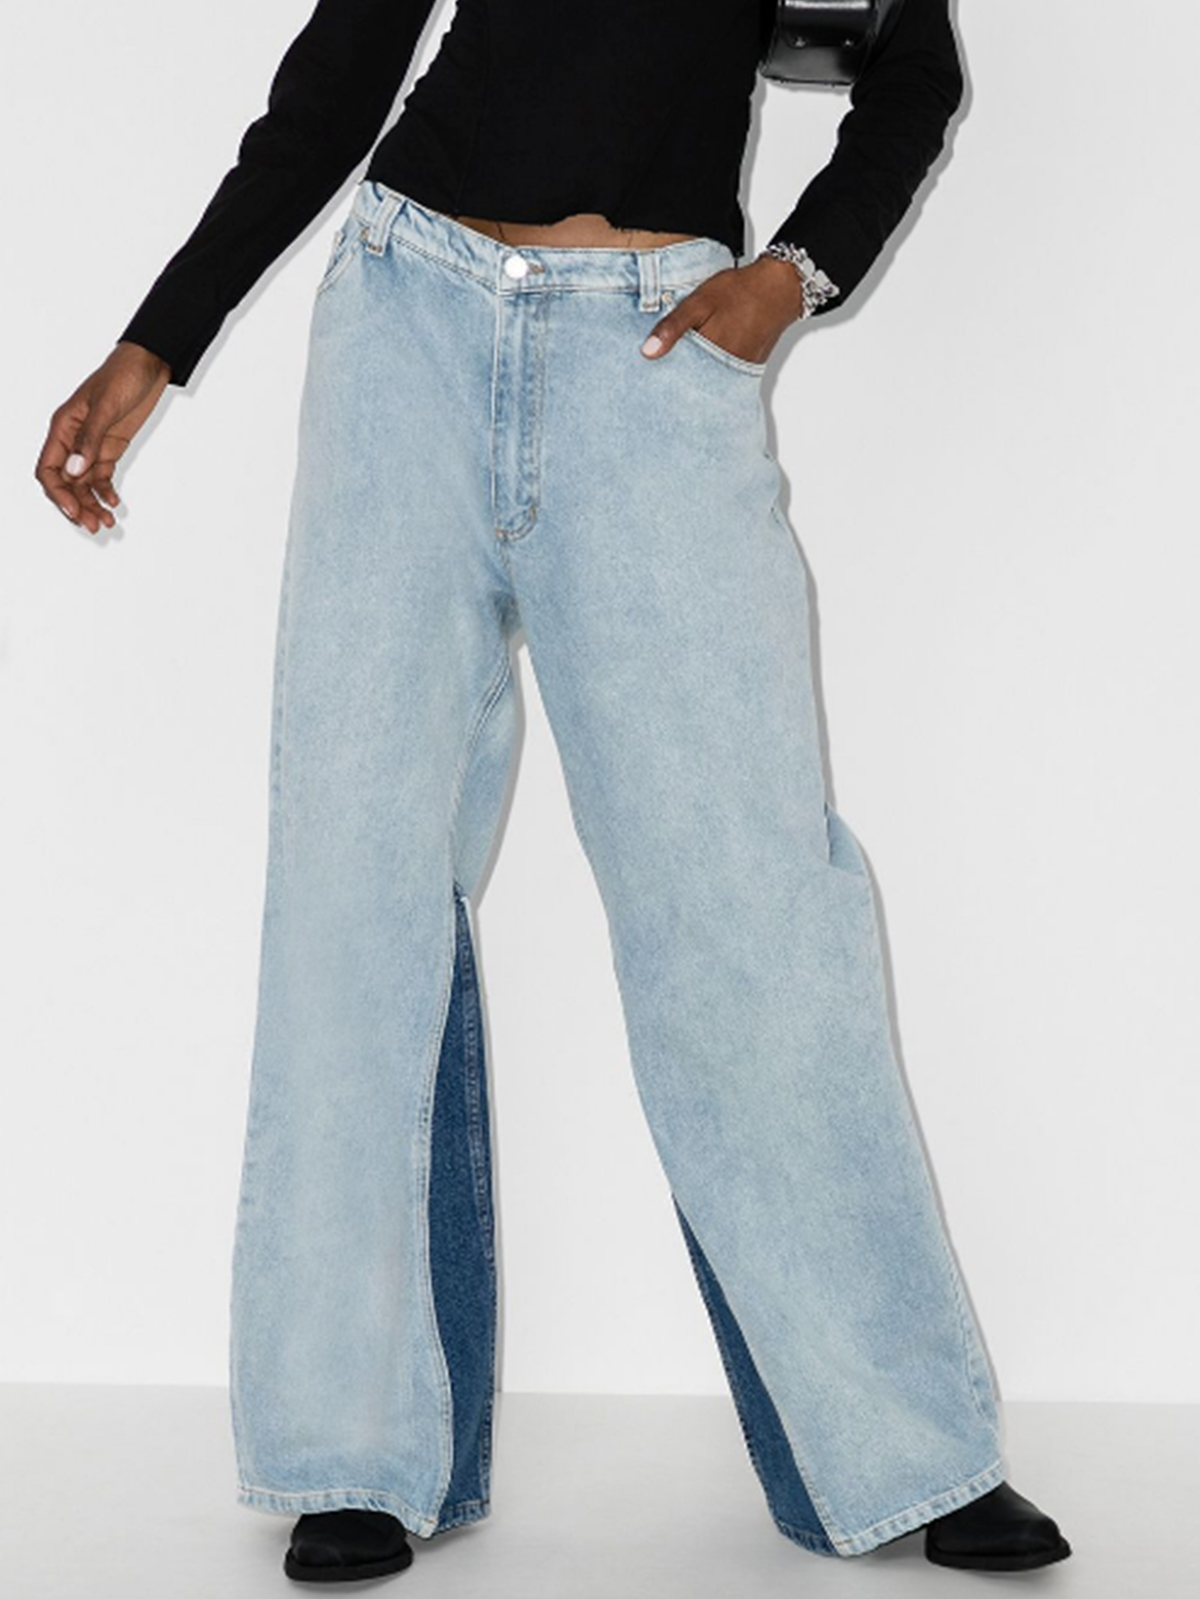 Skater Jeans Are the New Denim Trend to Try This Fall | Who What Wear